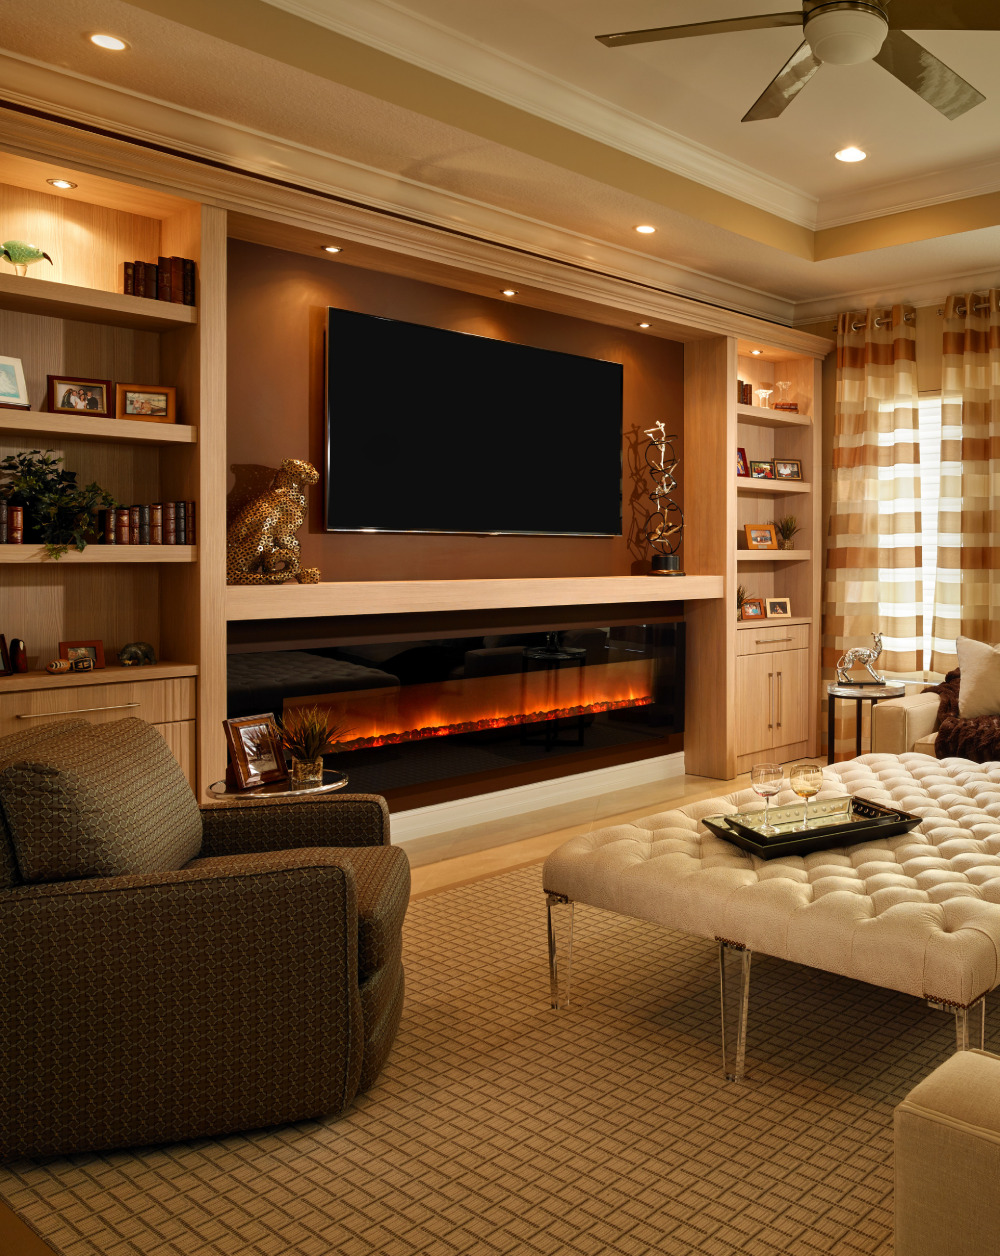 1-17-2-1 Electric fireplace ideas with the TV above: 14 Examples